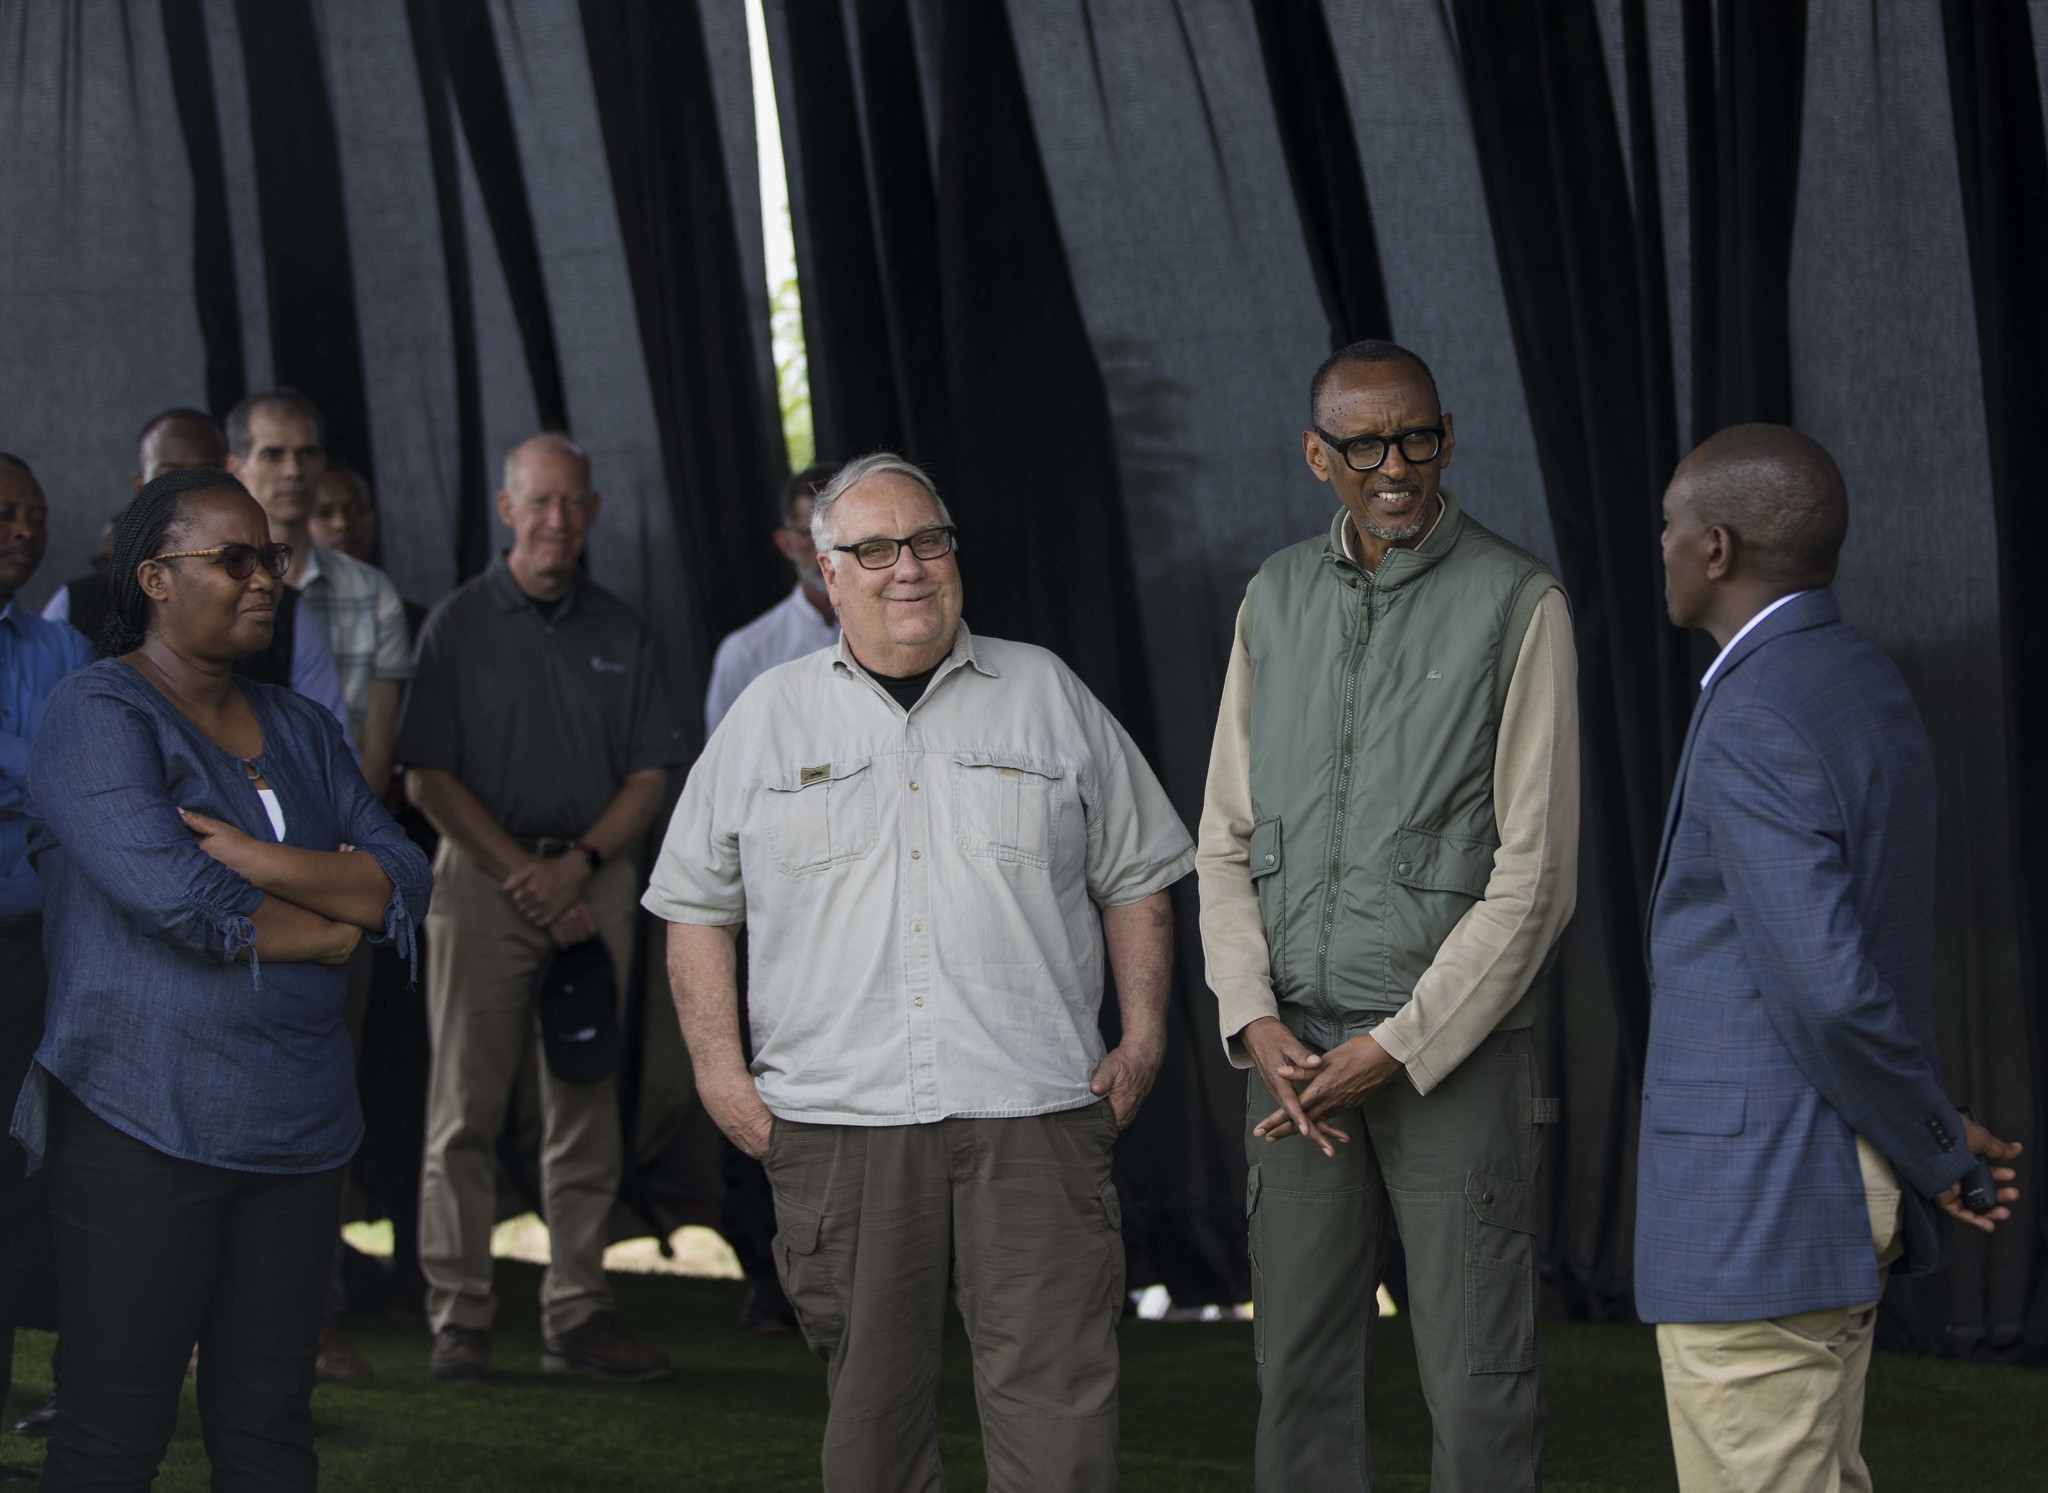 President Paul Kagame during the inauguration of the Nasho solar-powered irrigation project in Kirehe District on Wednesday. The President is flanked by American philanthropist Howard Buffett, Agriculture and Animal Resources minister Geraldine Mukeshimana (2nd left) and Eastern Province governor Fred Mufulukye (left). The Howard Graham Buffett Foundation-backed US$39 million project is already having significant impact on the productivity of farmers in the area. / Village Urugwiro